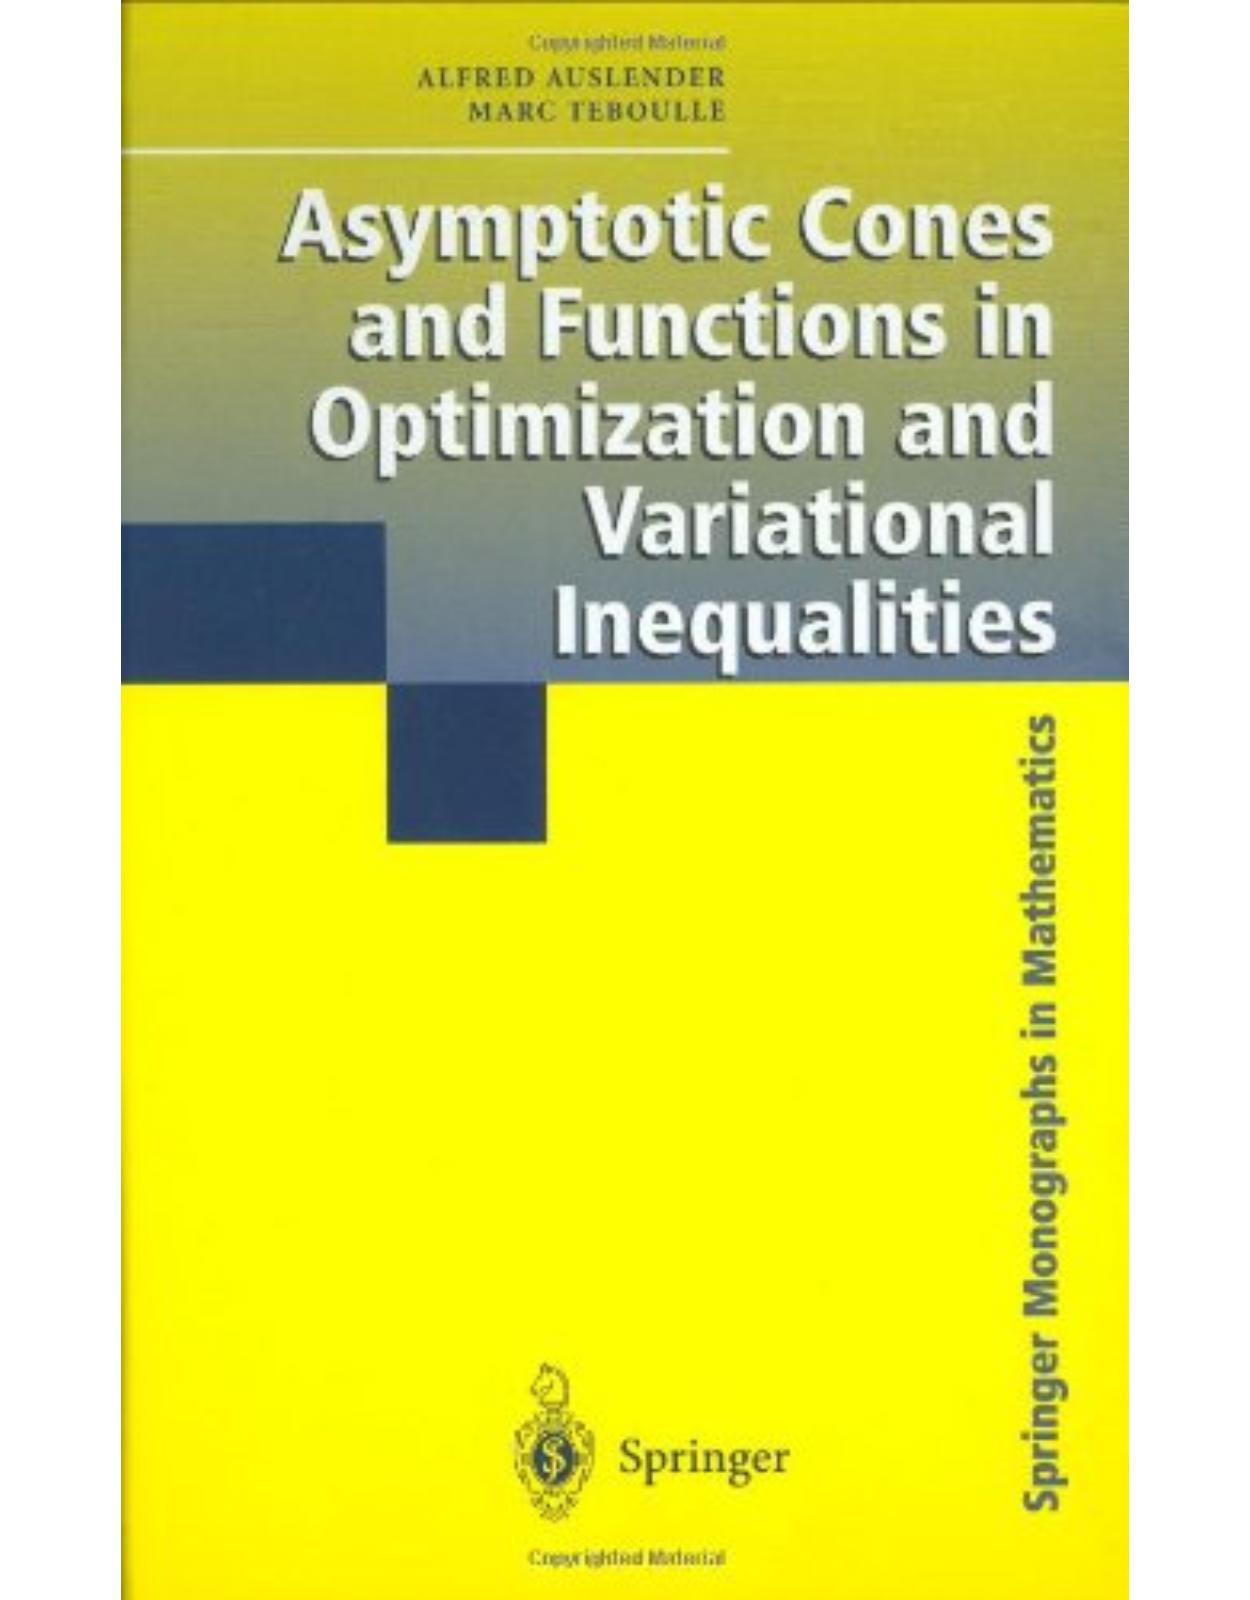 Asymptotic Cones and Functions in Optimization and Variational Inequalities (Springer Monographs in Mathematics) 